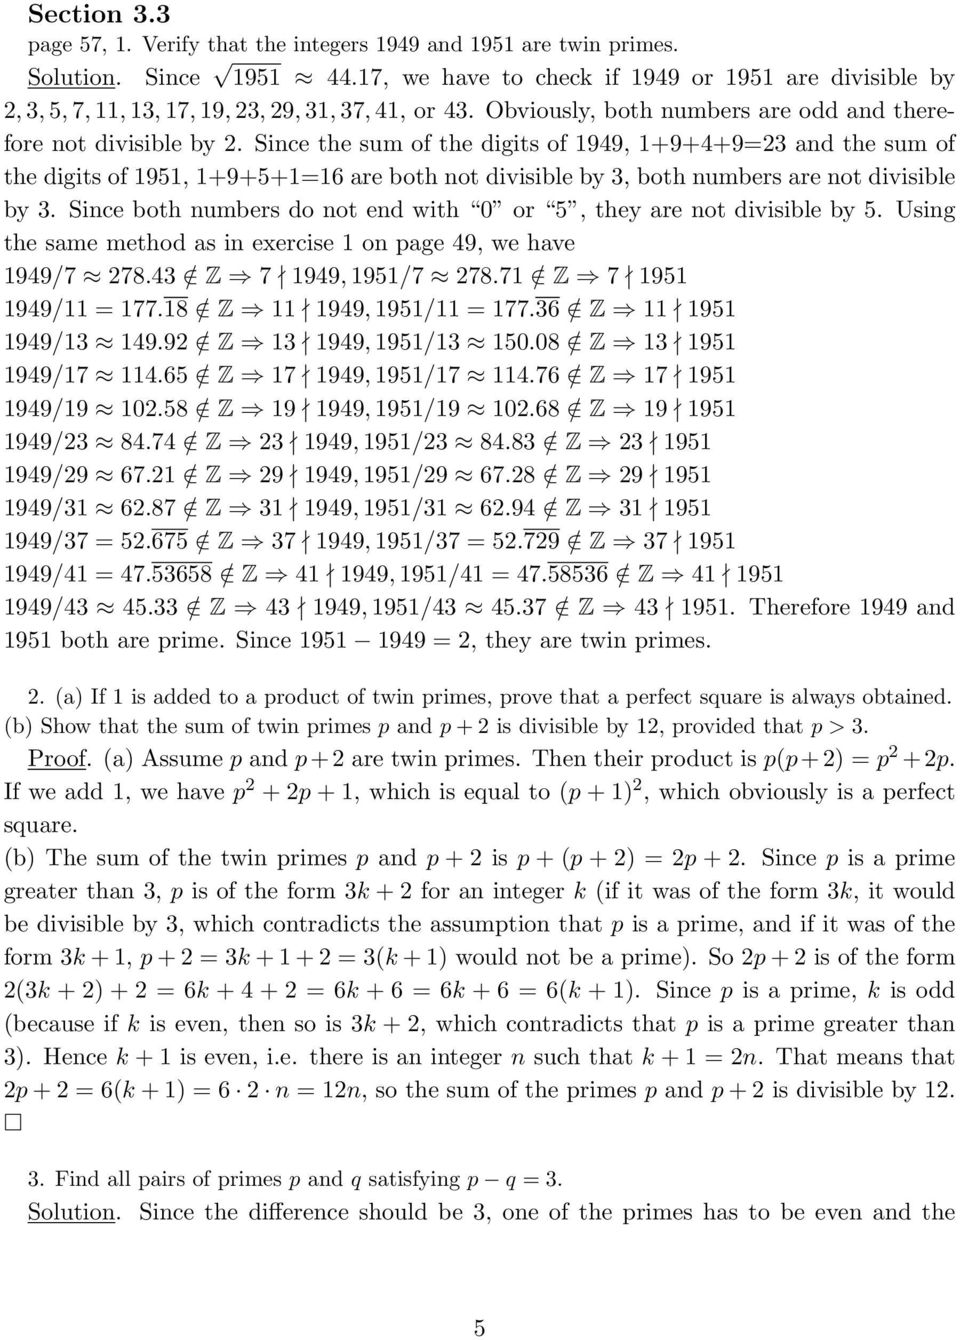 Since the sum of the digits of 1949, 1+9+4+9=3 and the sum of the digits of 1951, 1+9+5+1=16 are both not divisible by 3, both numbers are not divisible by 3.